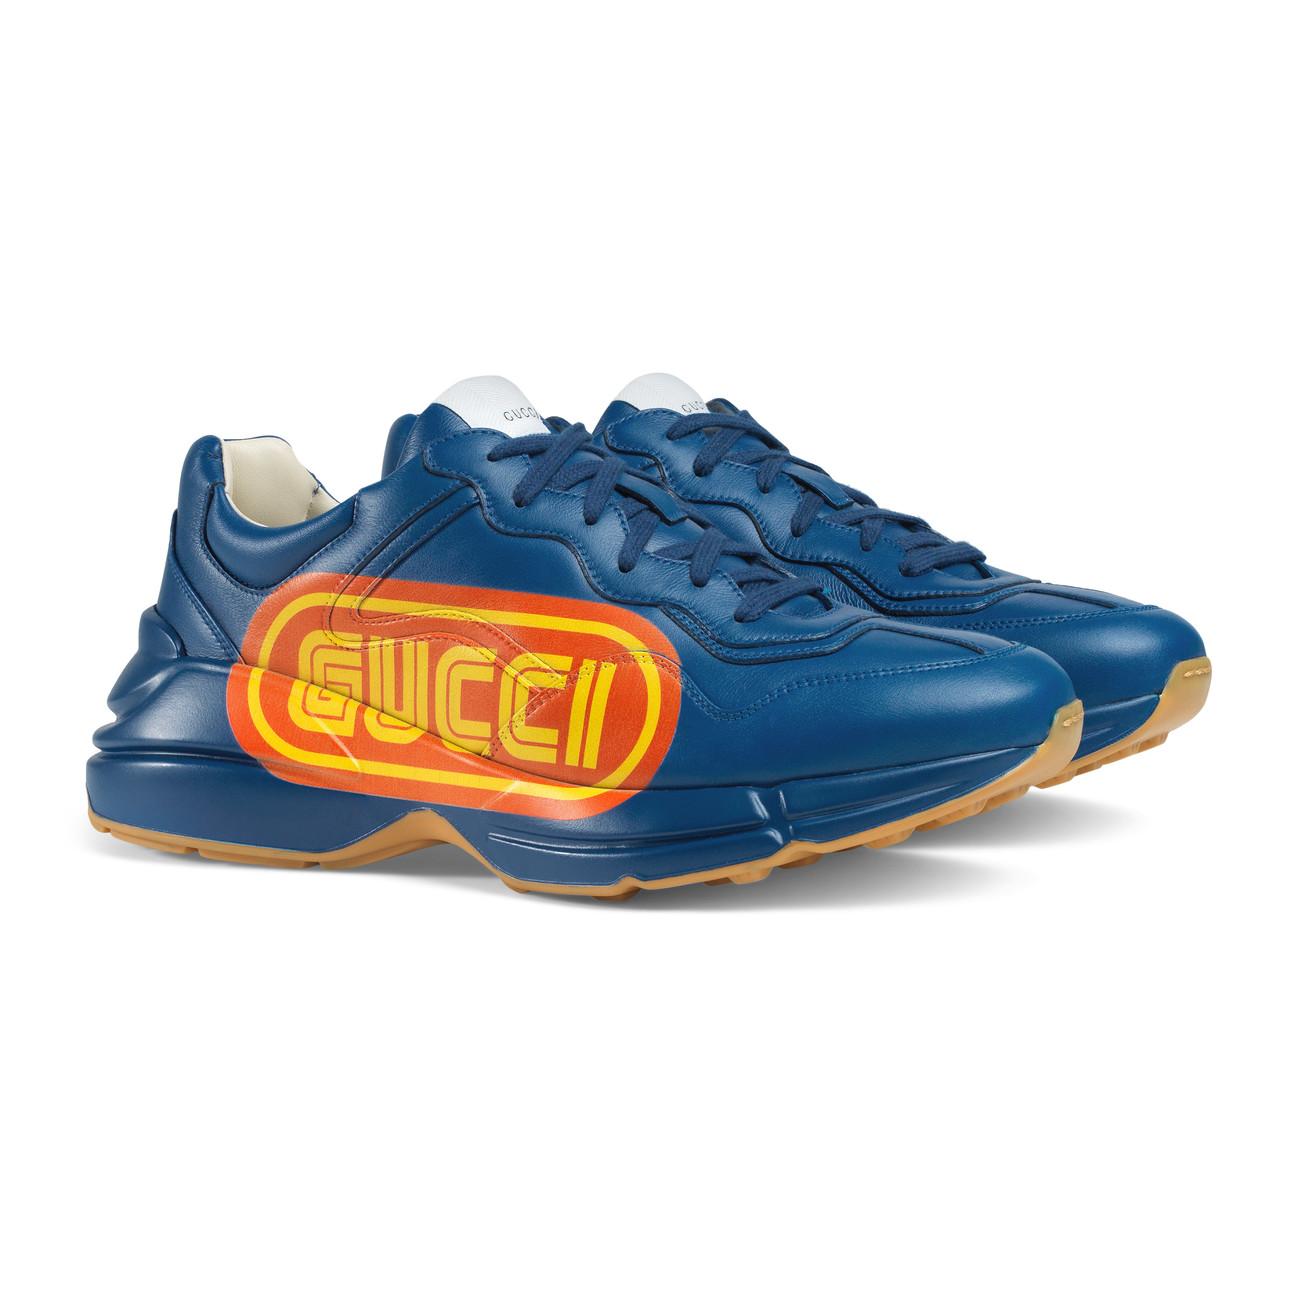 Gucci Rhyton Print Leather Sneaker in 